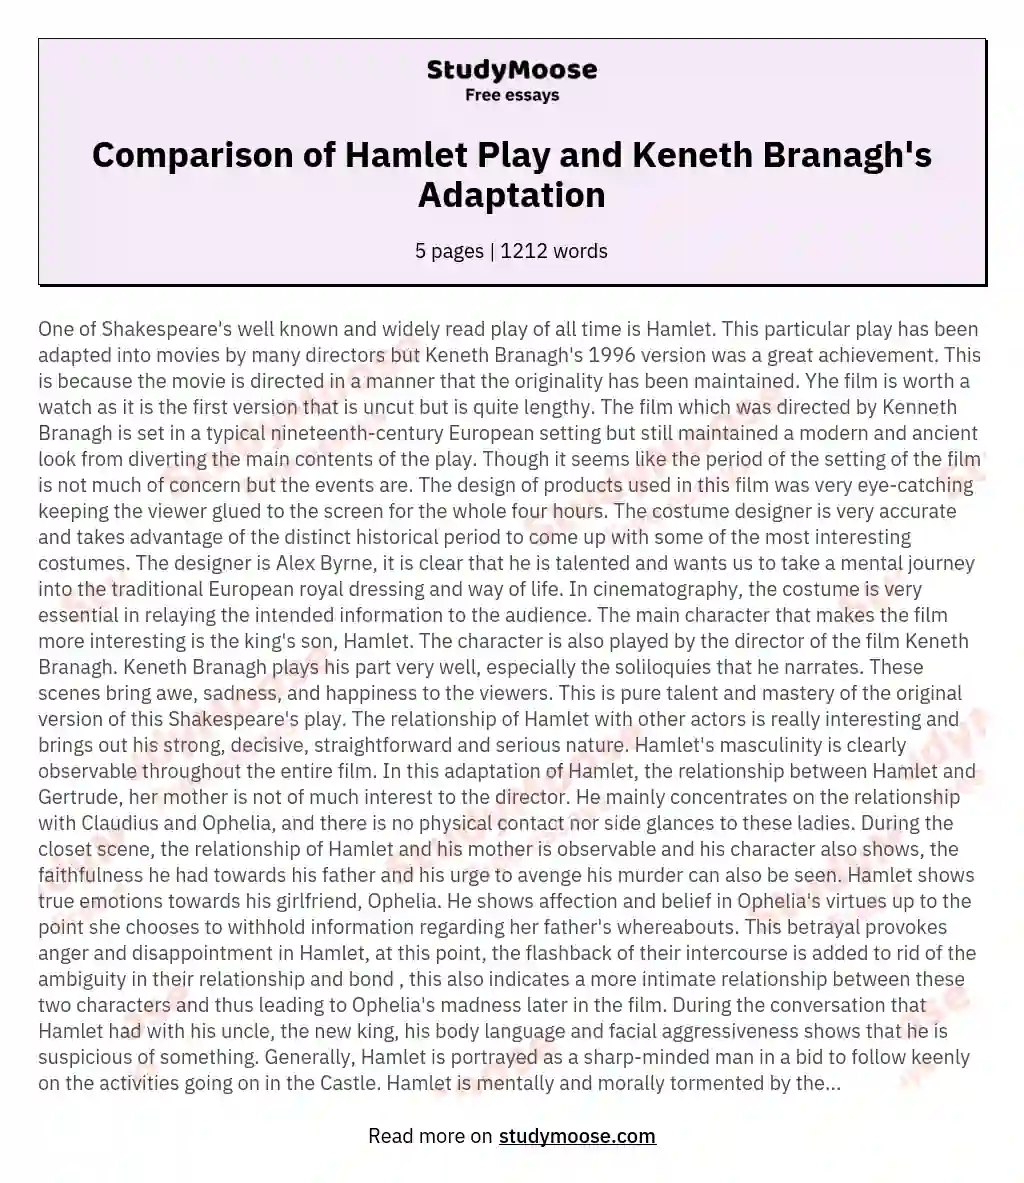 compare and contrast essay hamlet